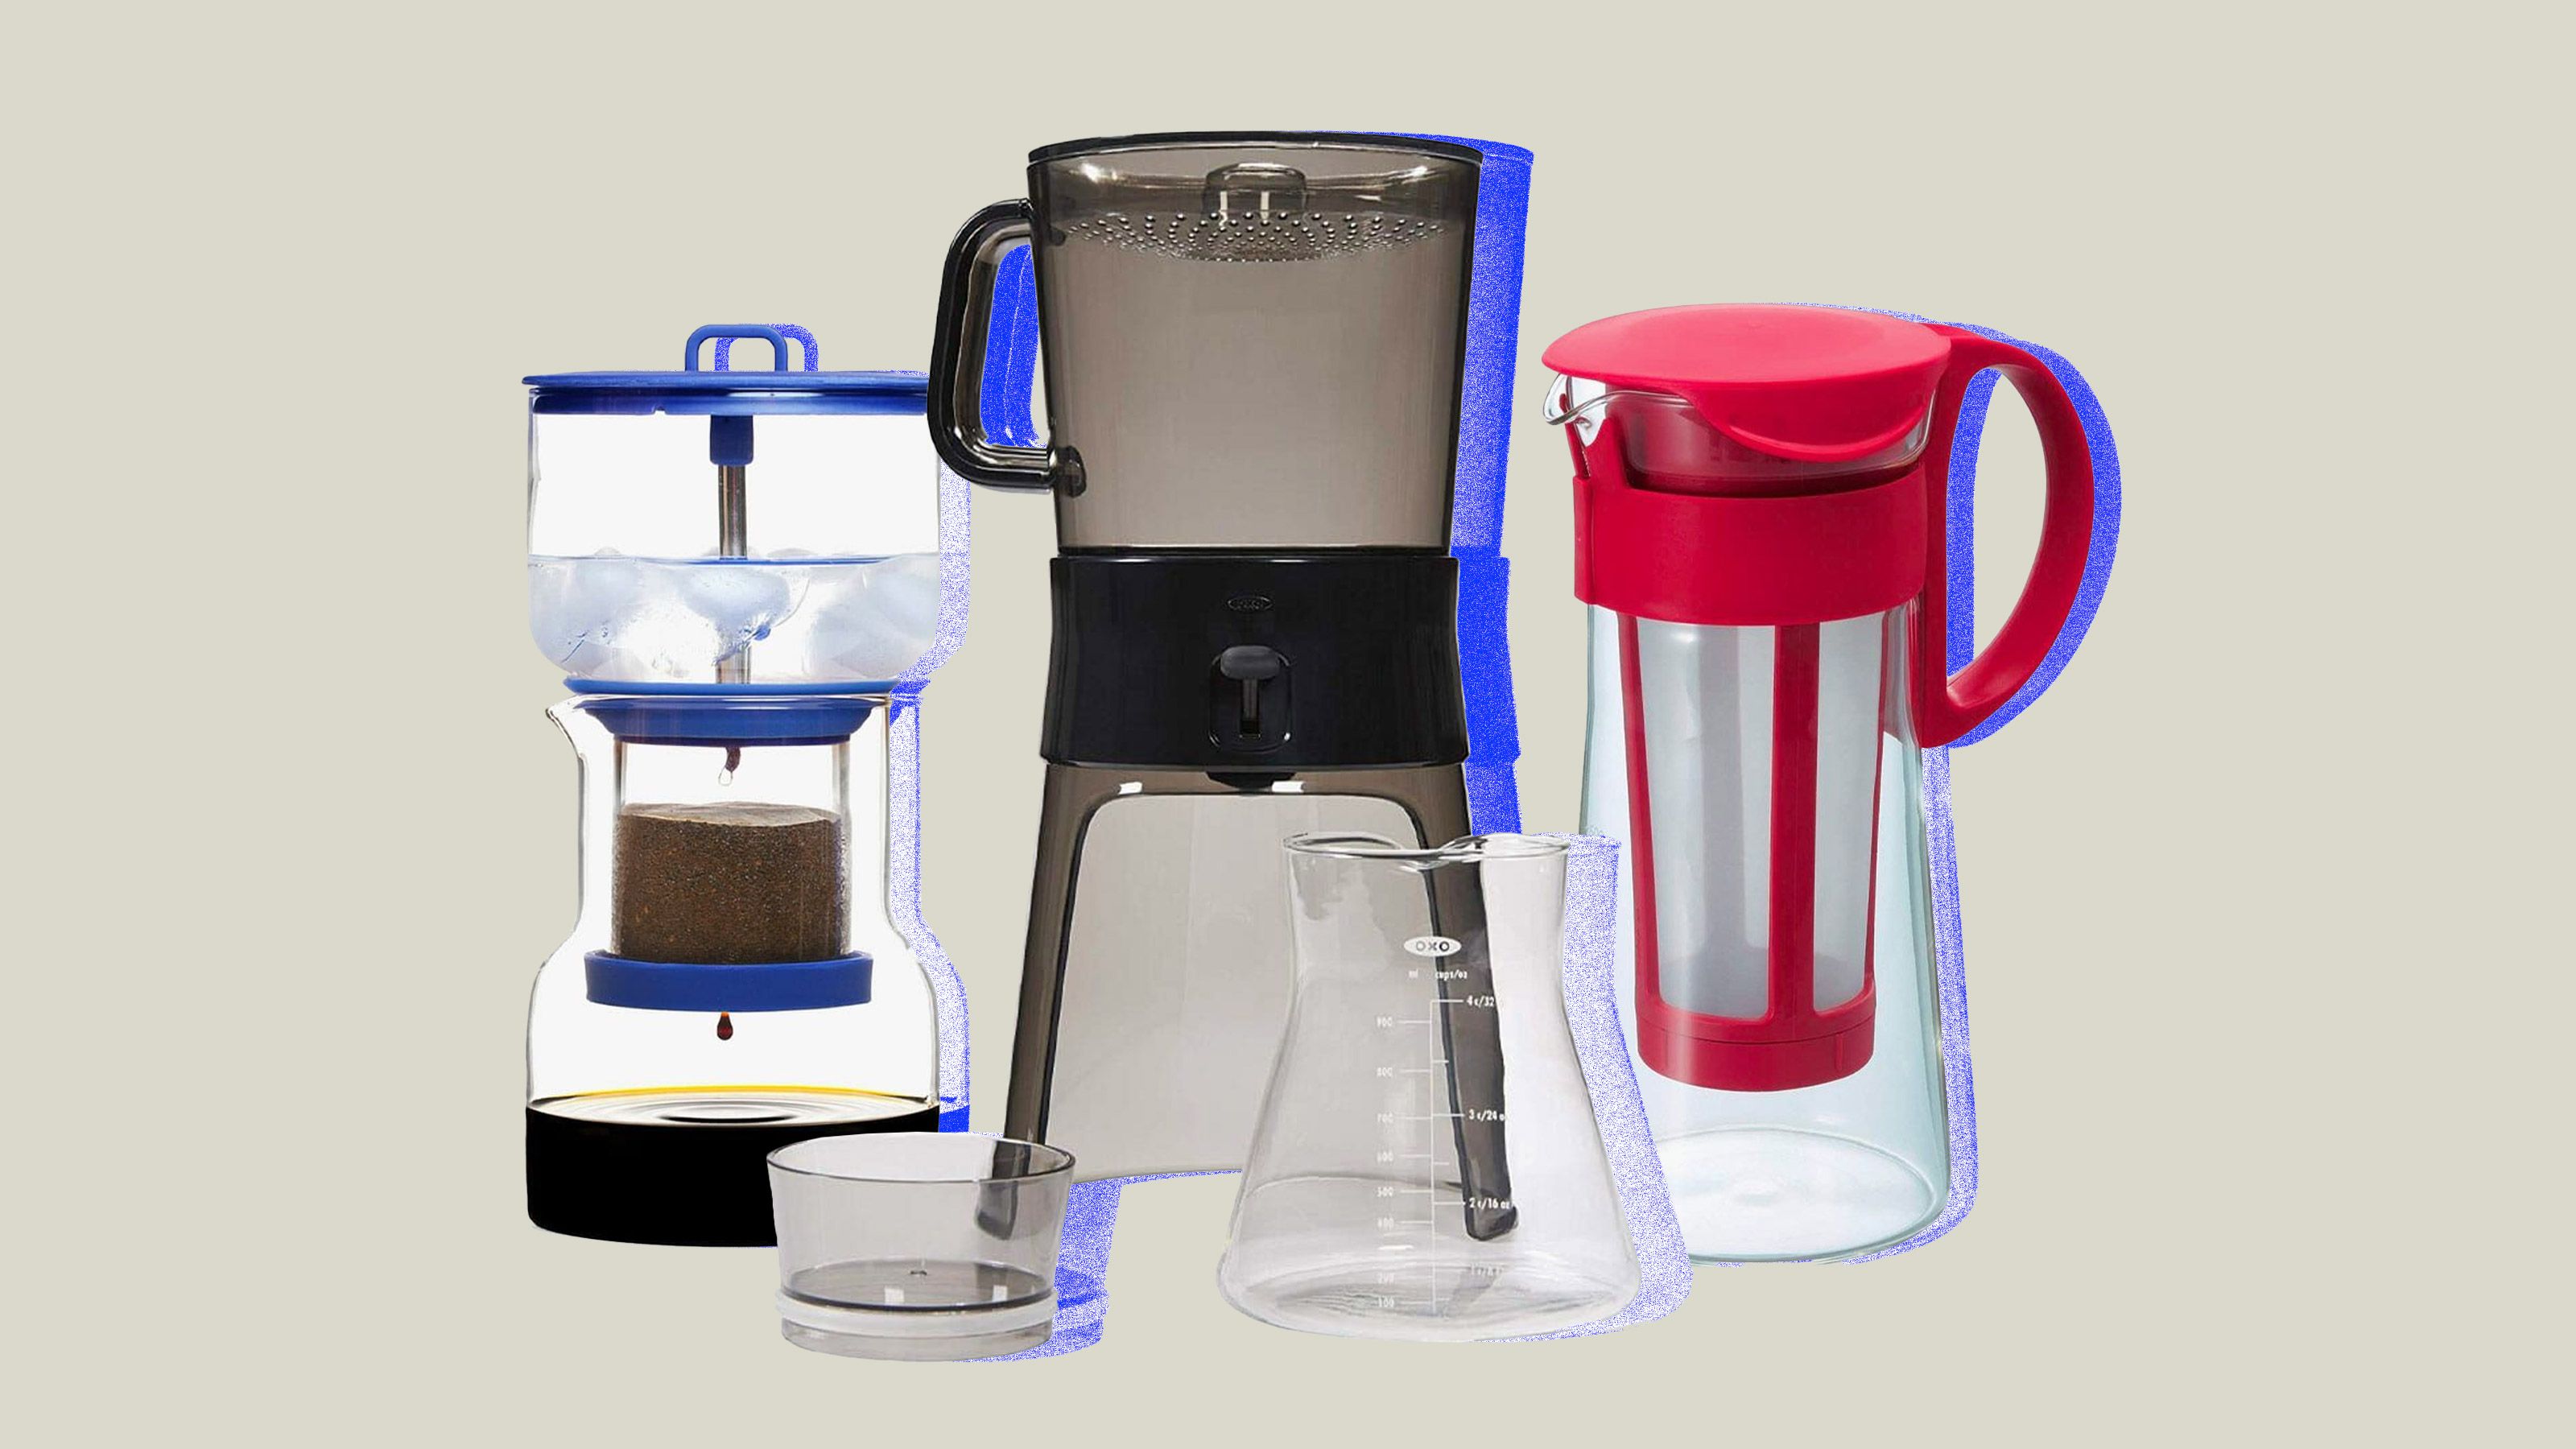 OXO Cold Brew Coffee Maker: Convenient, but not perfect